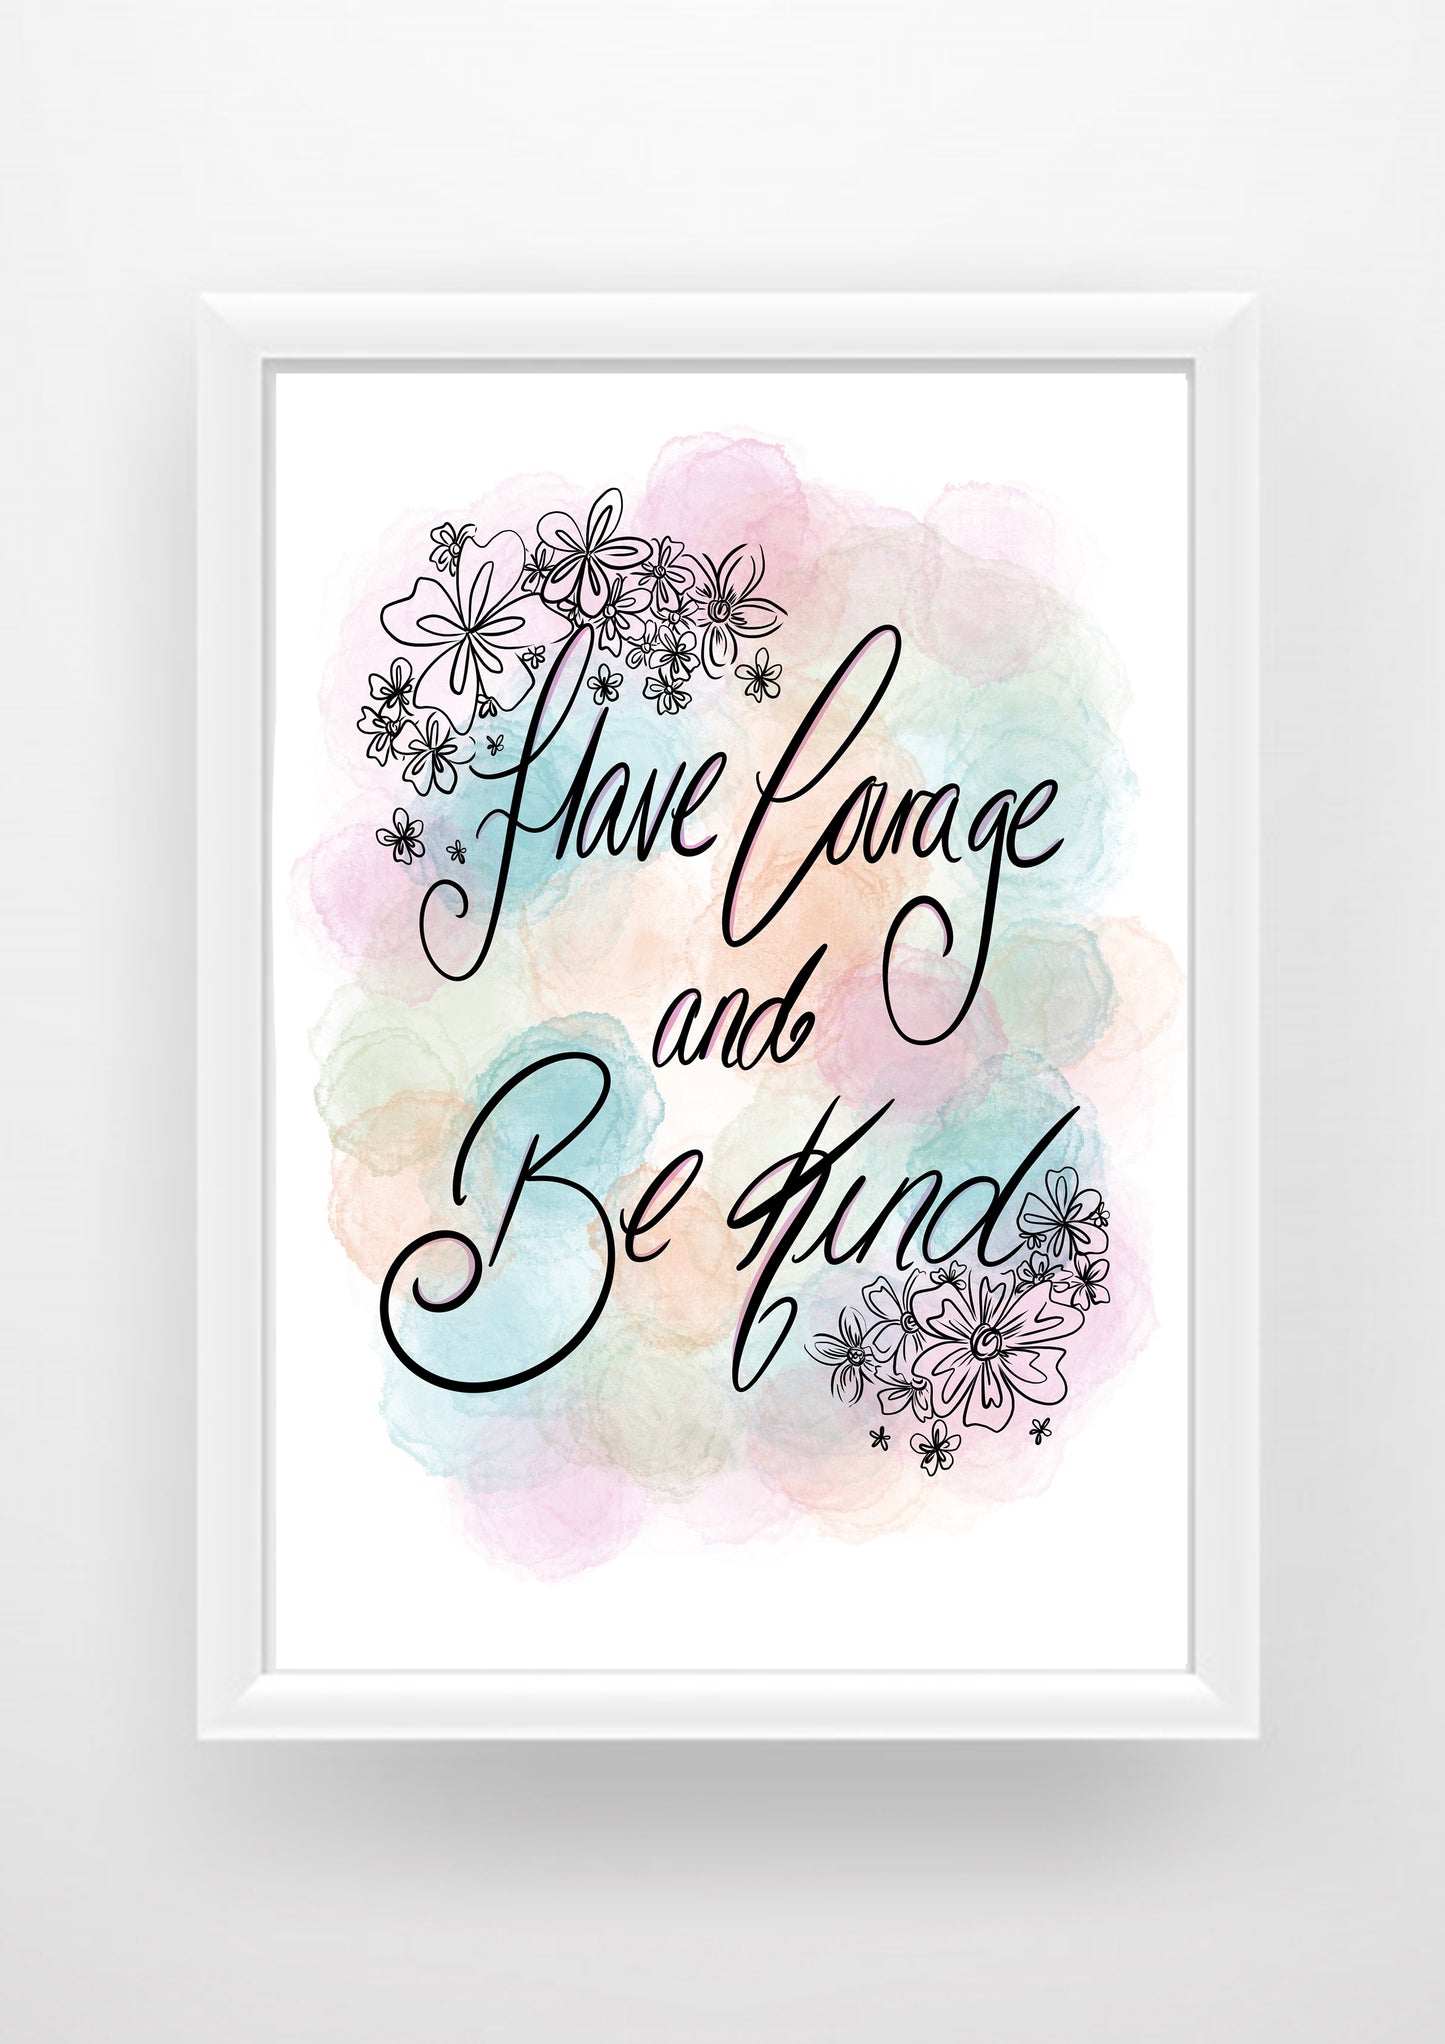 Have courage and be kind quote Print / Sticker / bookmark (Copy)